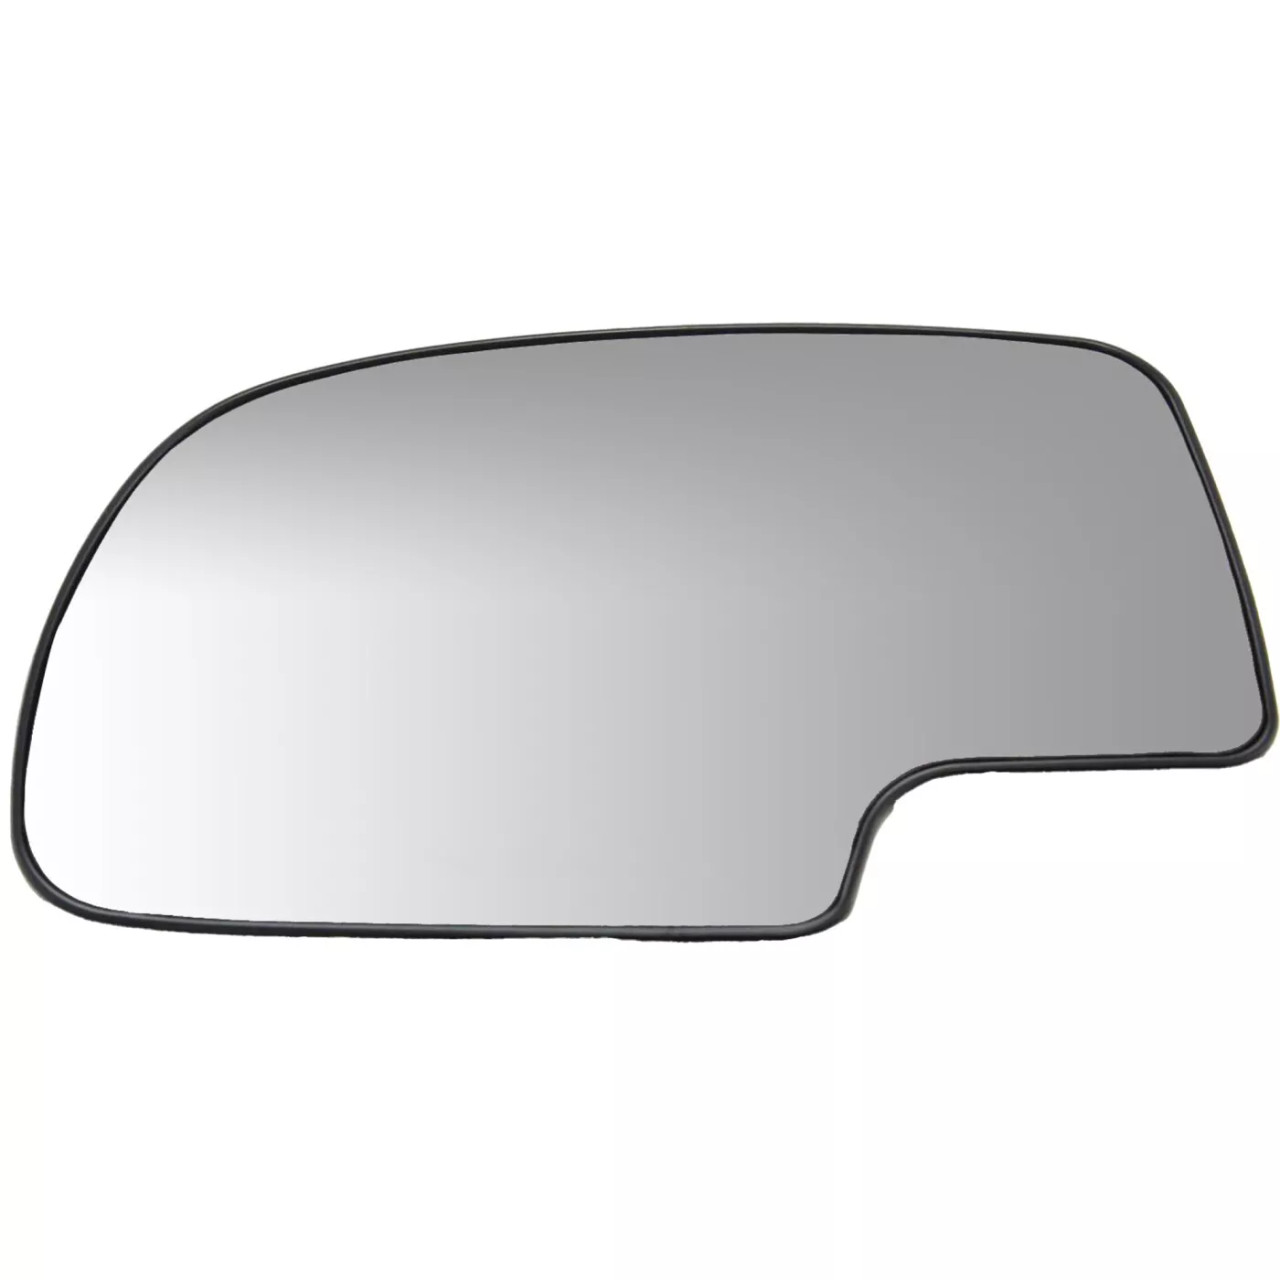 Mirror Glass Set For 1999-2002 Chevrolet Silverado 1500 2500 with Backing Plate